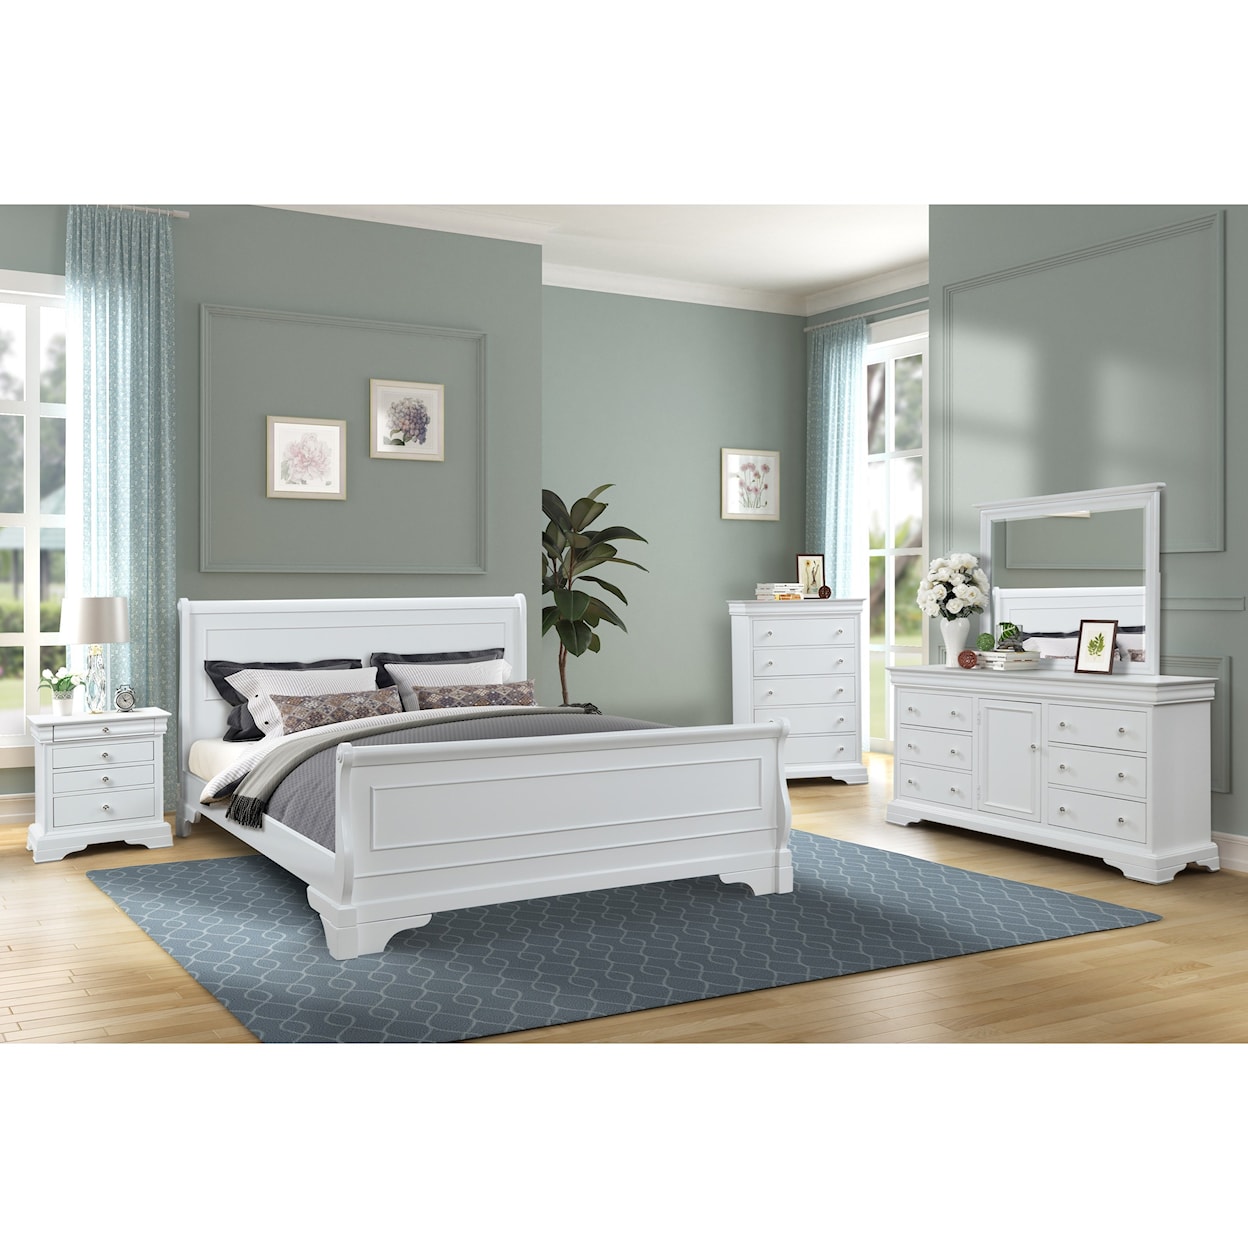 New Classic Furniture Versaille Twin Bedroom Group